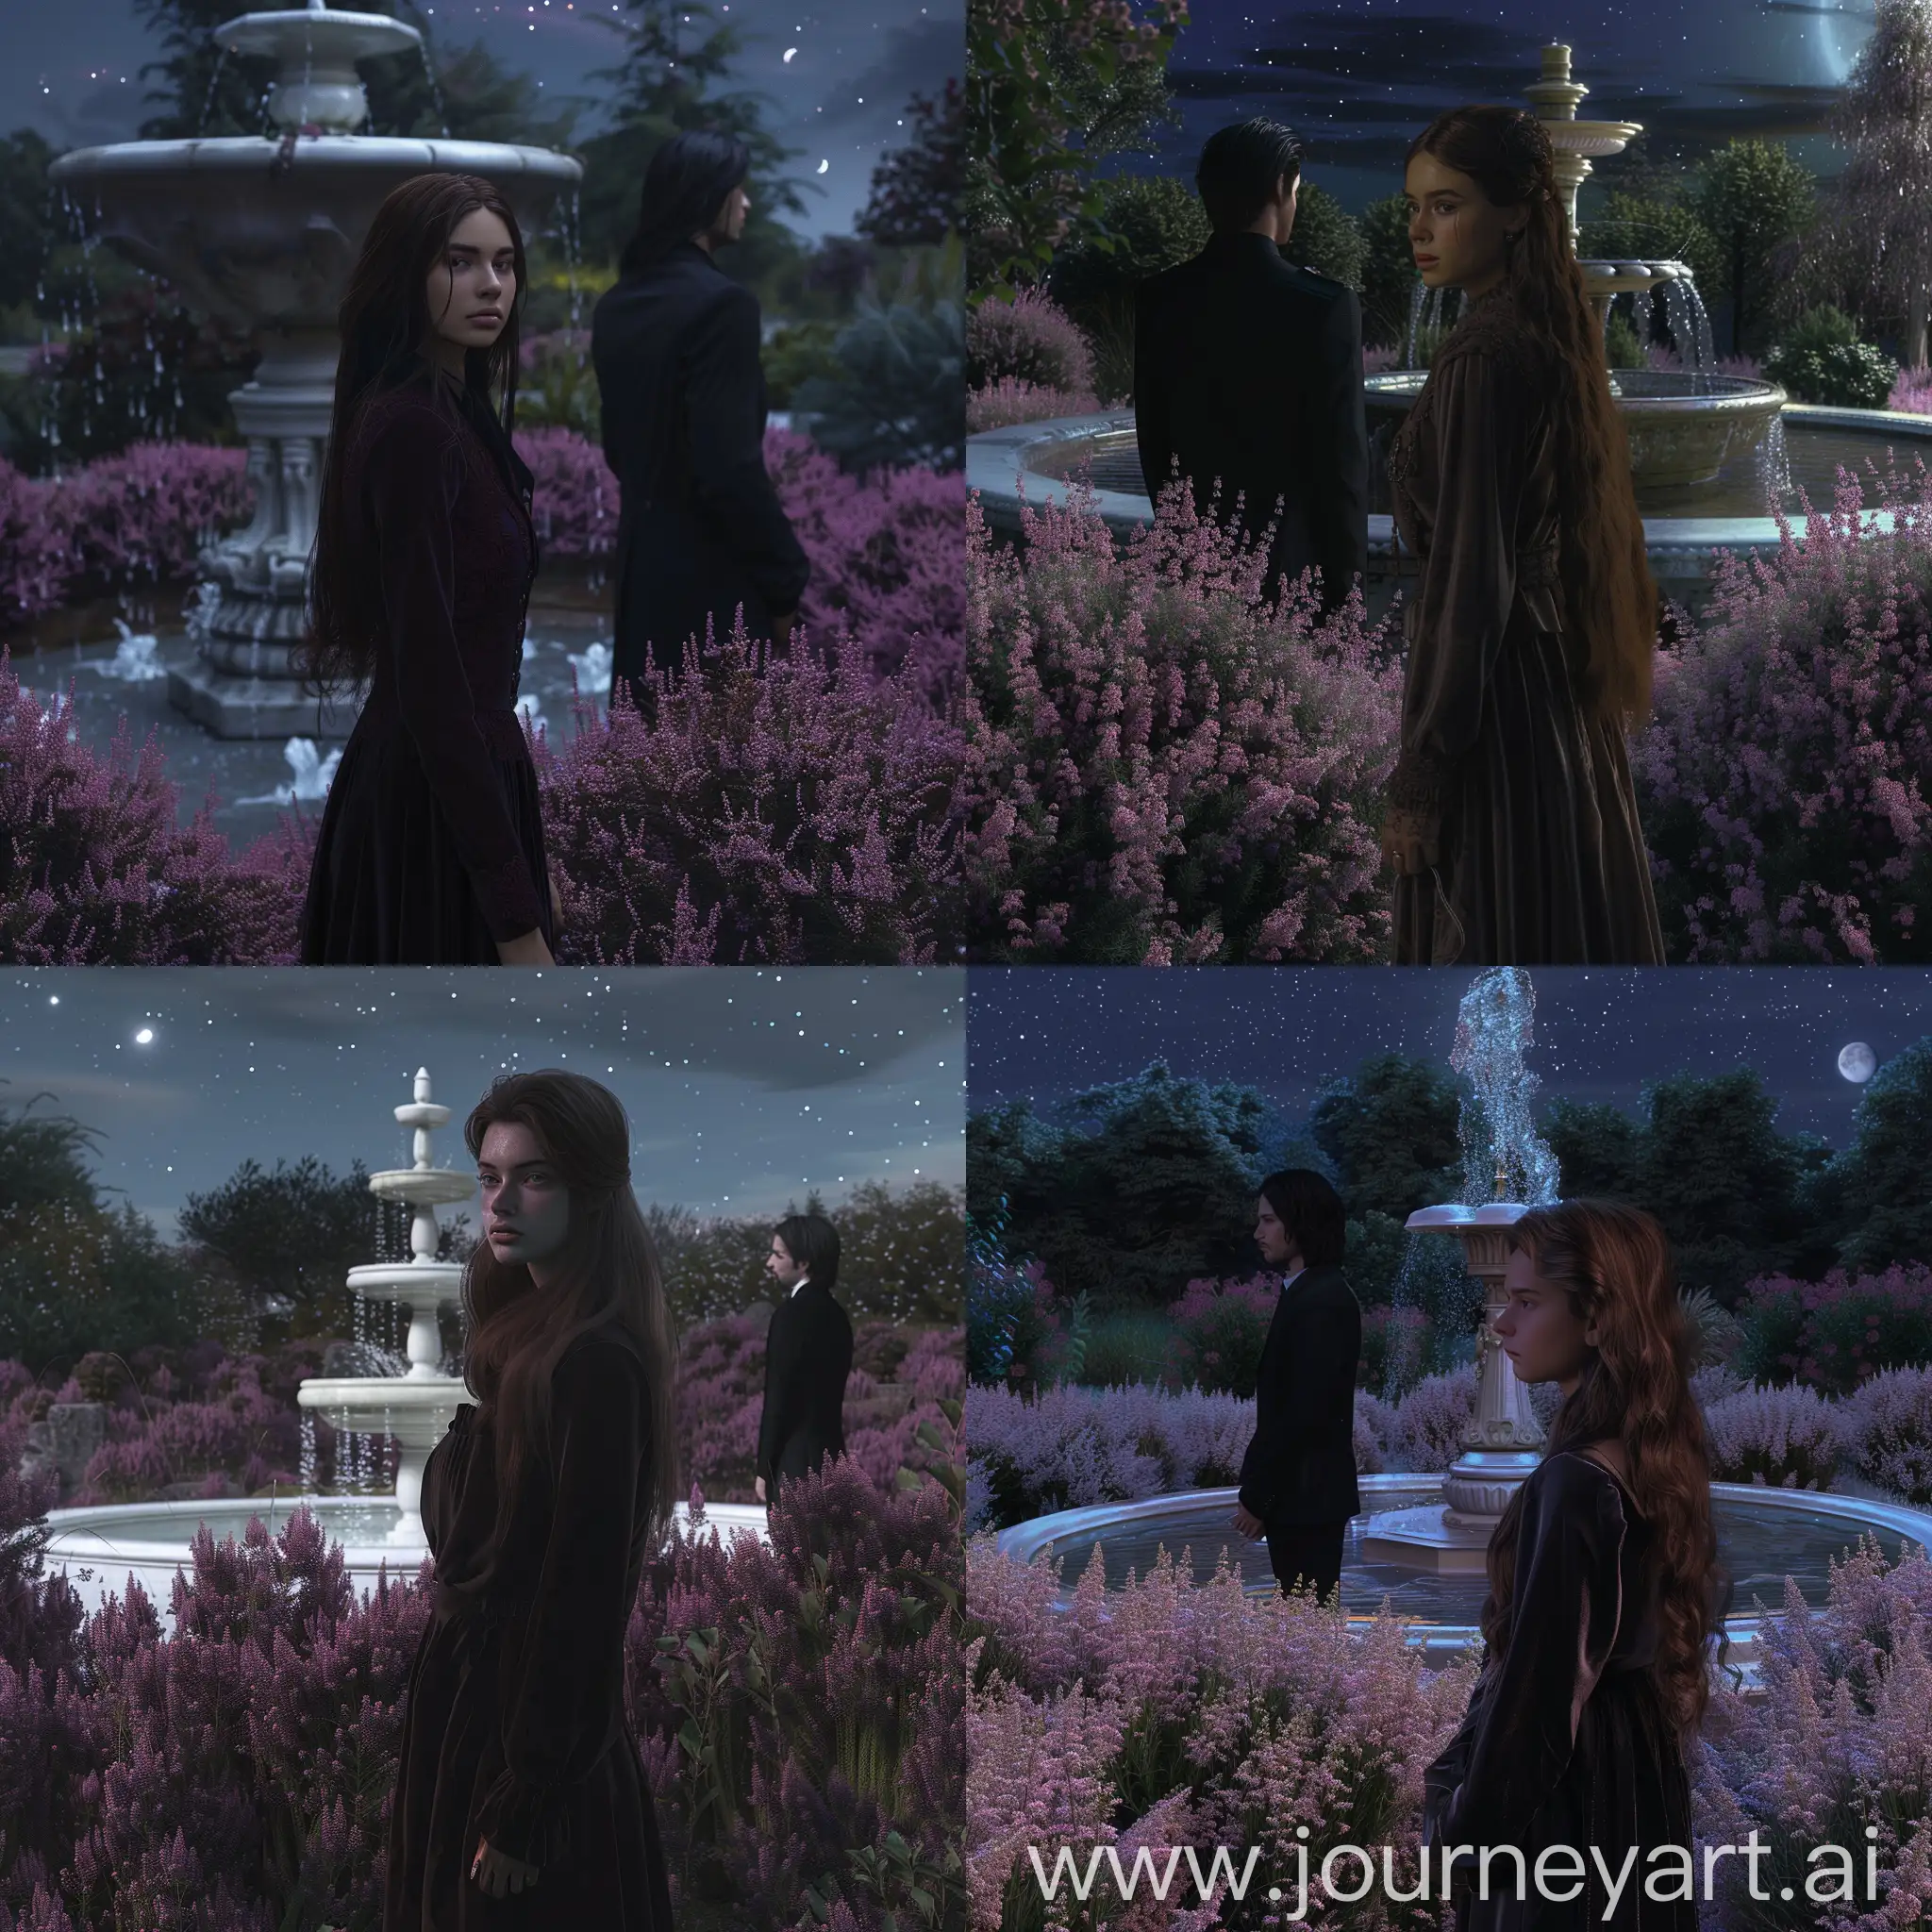 Gothic-Couple-in-Moonlit-Garden-with-Heather-Flowers